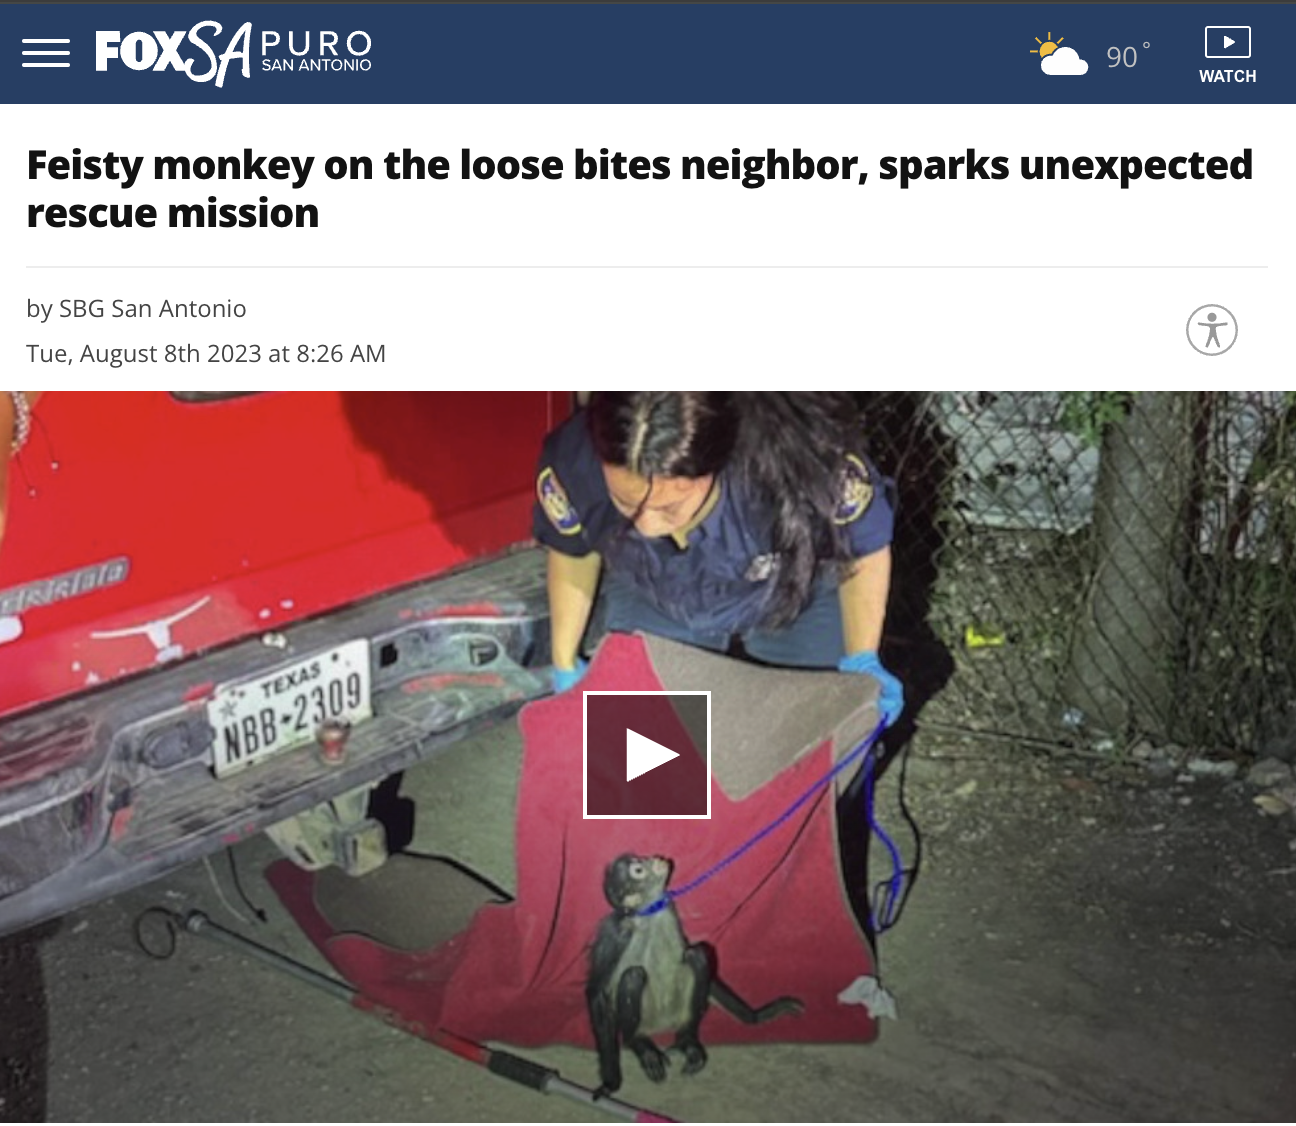 car - Foxsa San Antonio 90 Watch Feisty monkey on the loose bites neighbor, sparks unexpected rescue mission by Sbg San Antonio Tue, August 8th 2023 at Texas Nbb2309